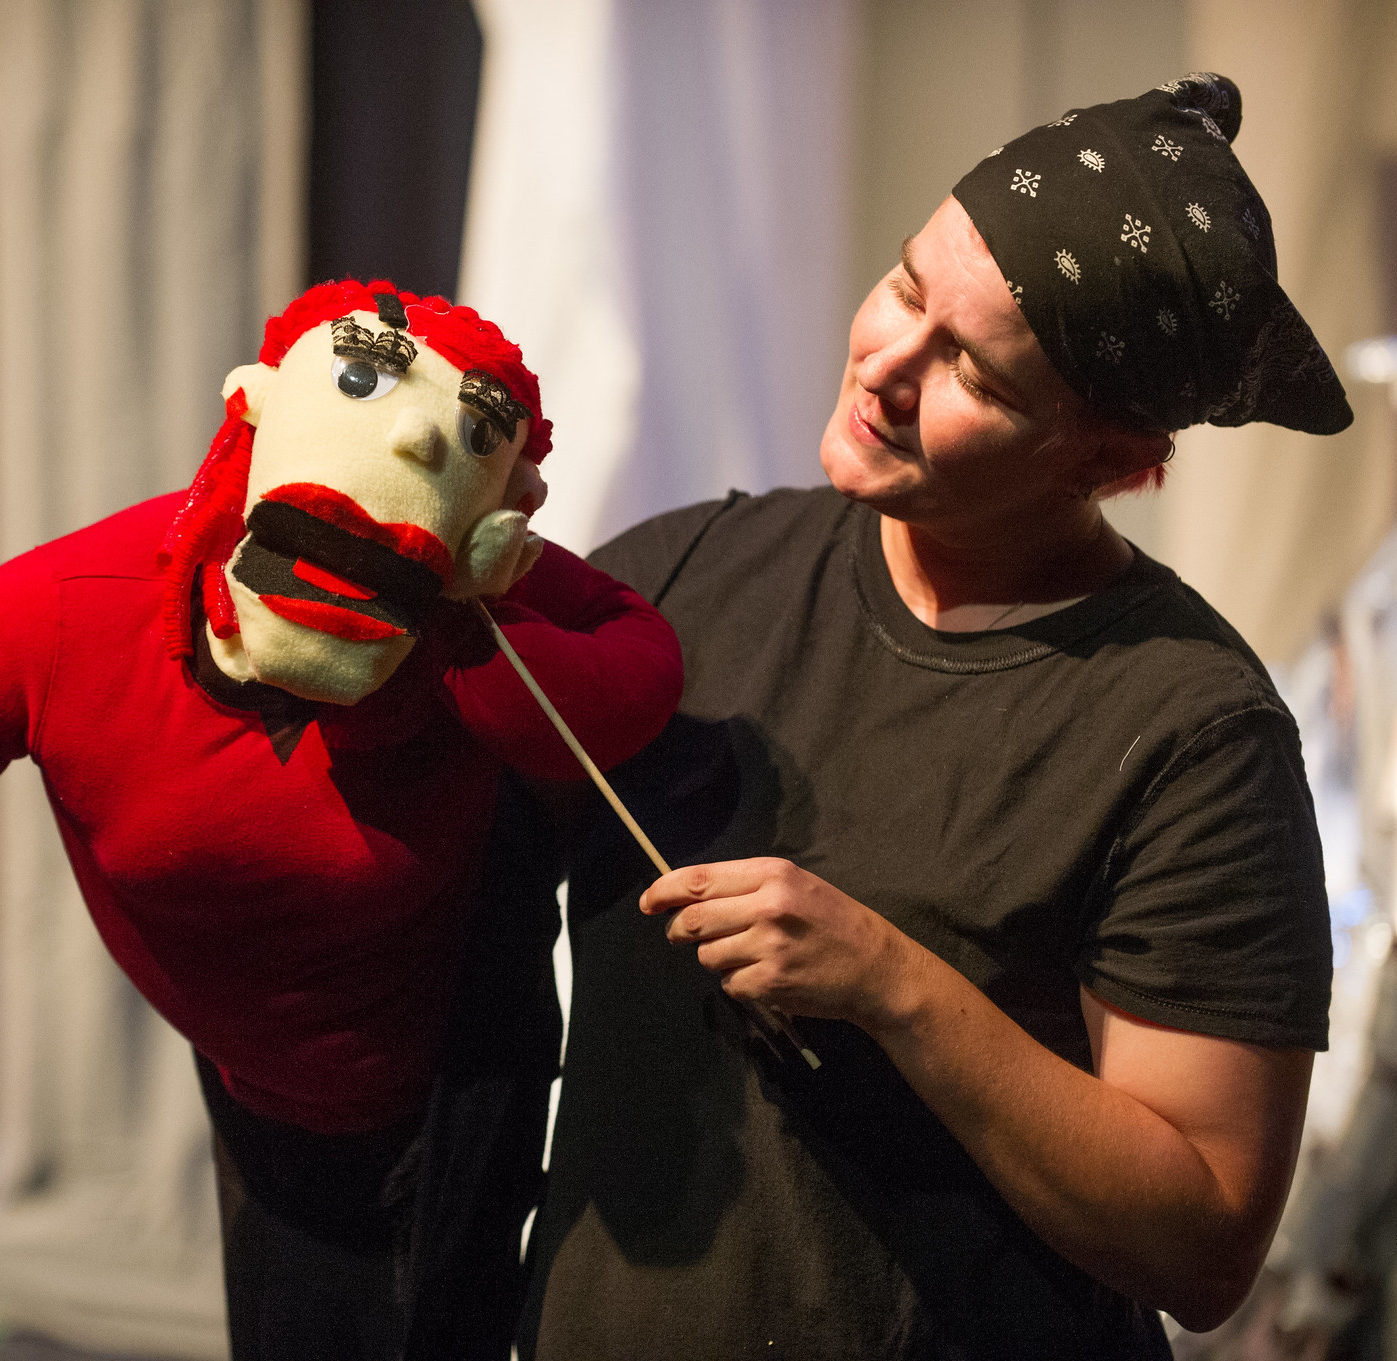 Theatre student performing with a puppet.